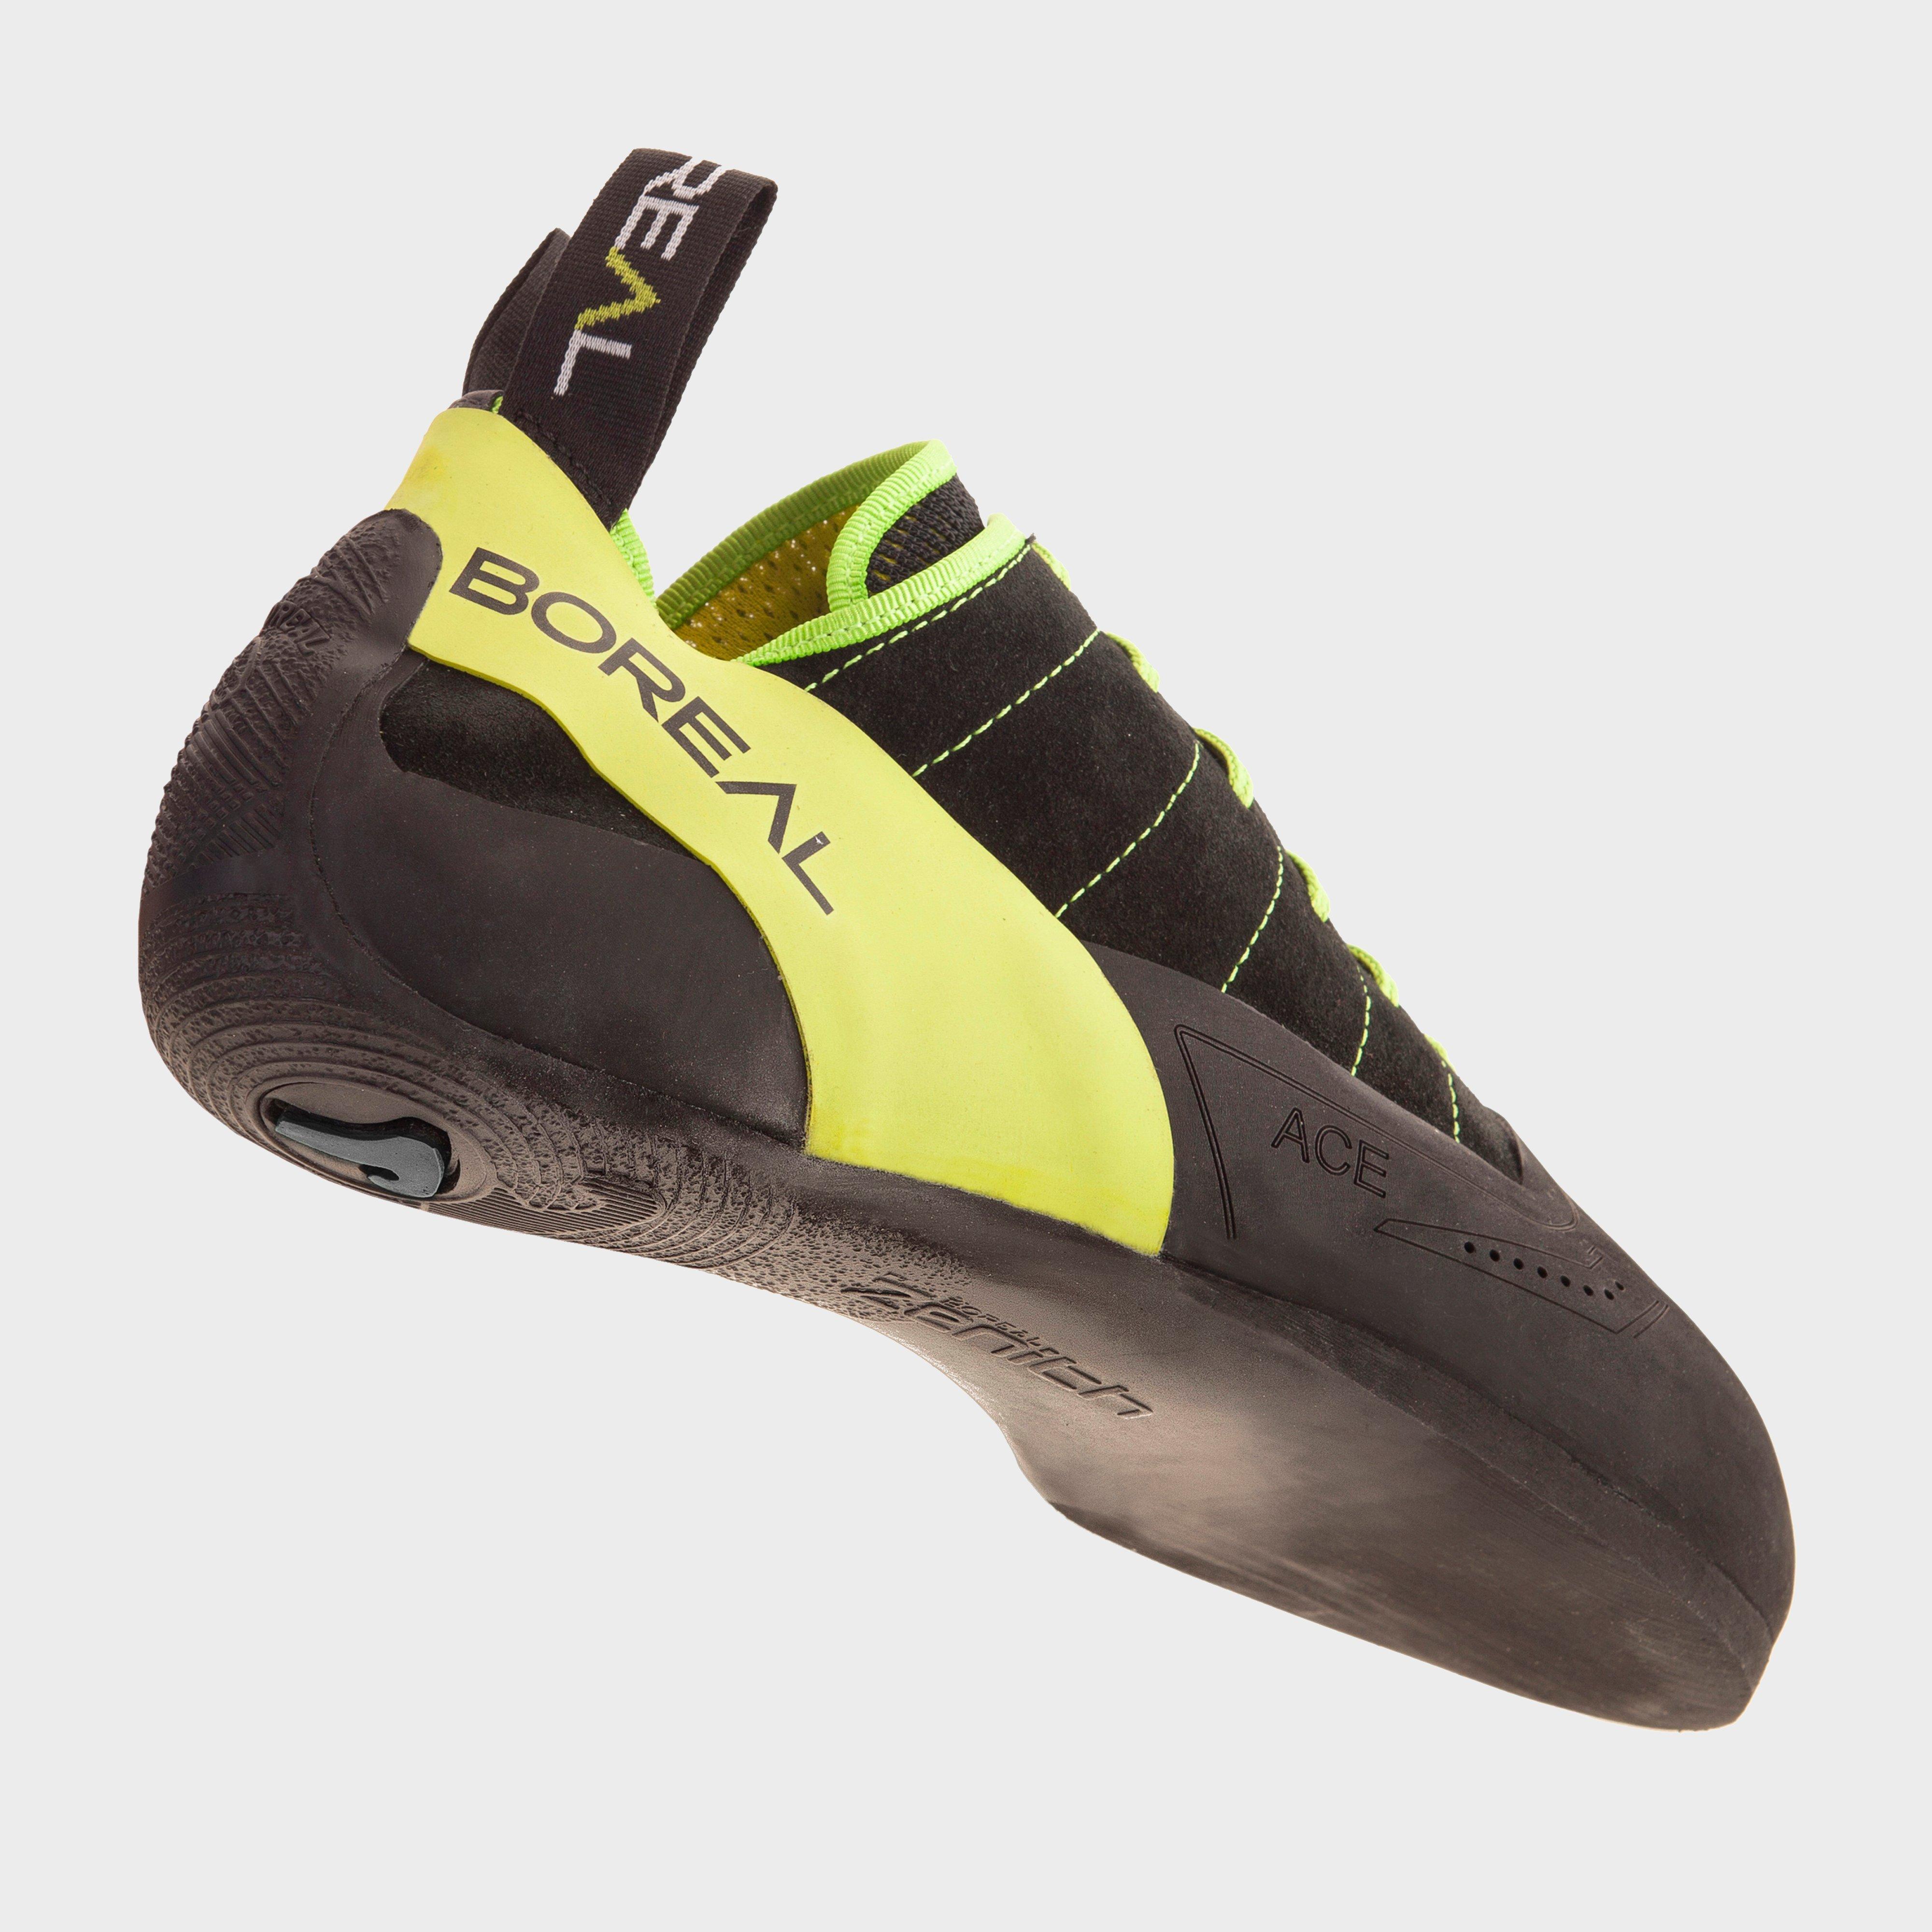 Boreal Ace Climbing Shoes Review